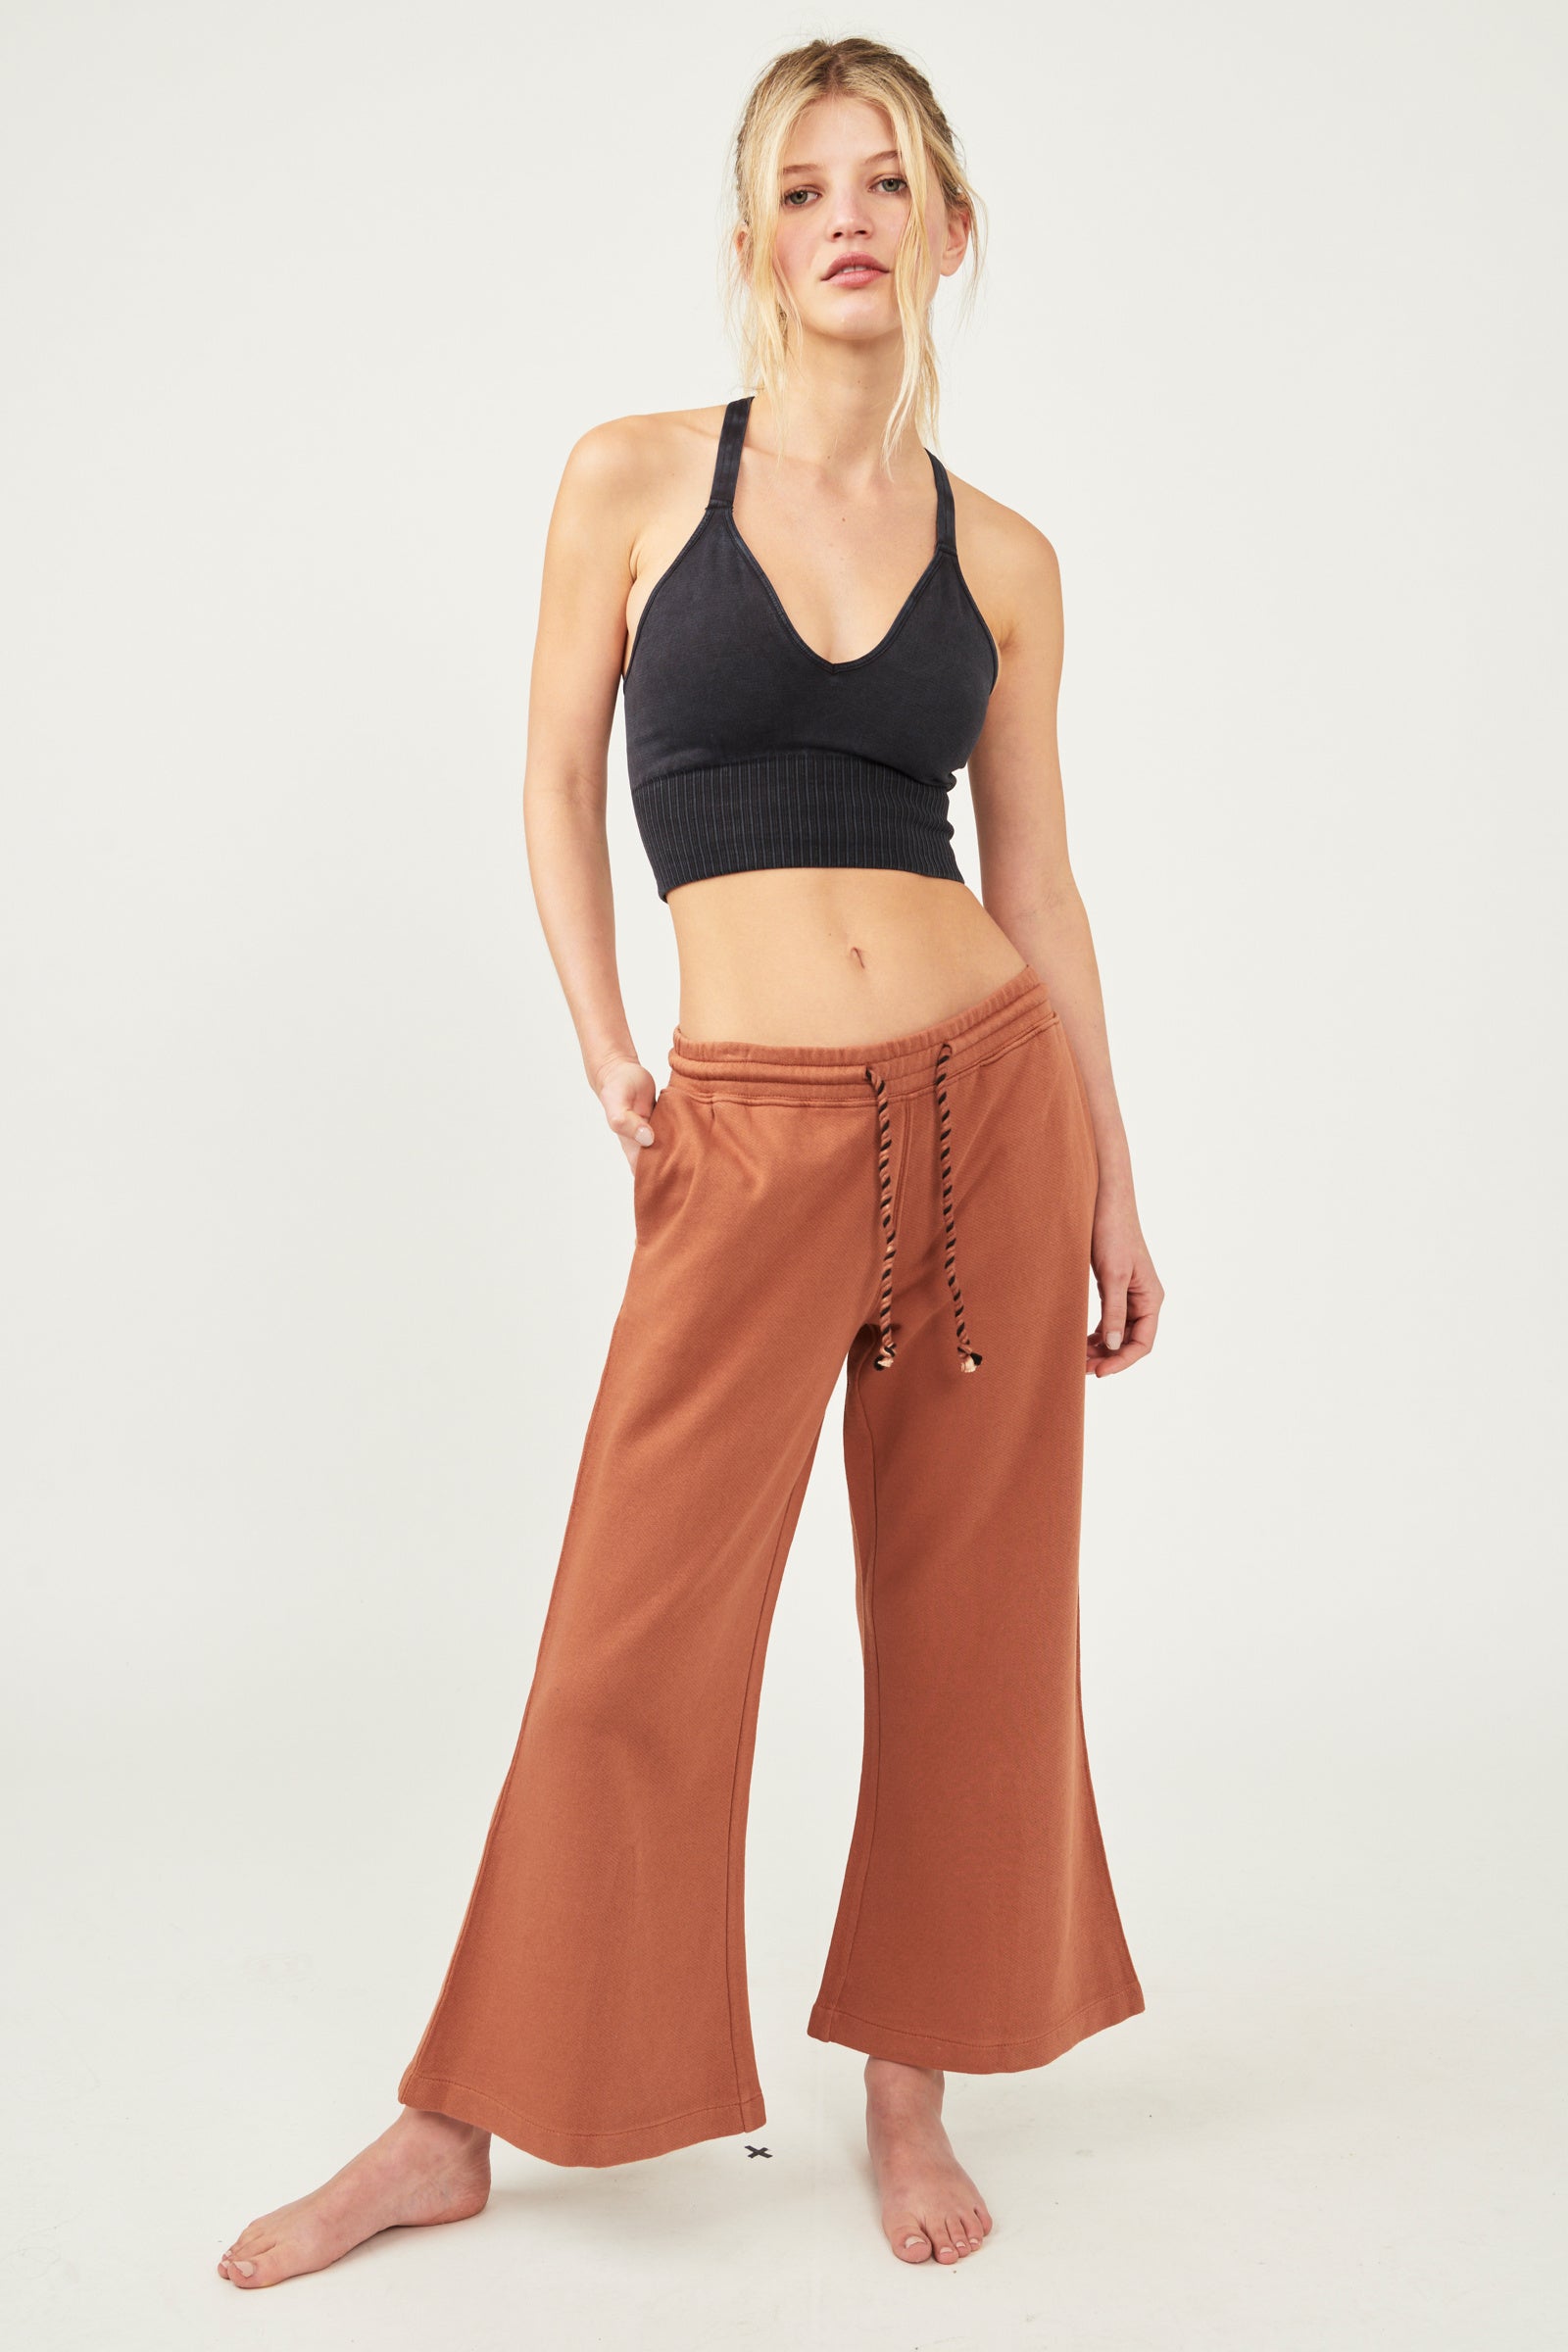 FREE PEOPLE MOVEMENT SUMMER TIDE PANT - SPICED COPPER 1263 – Work